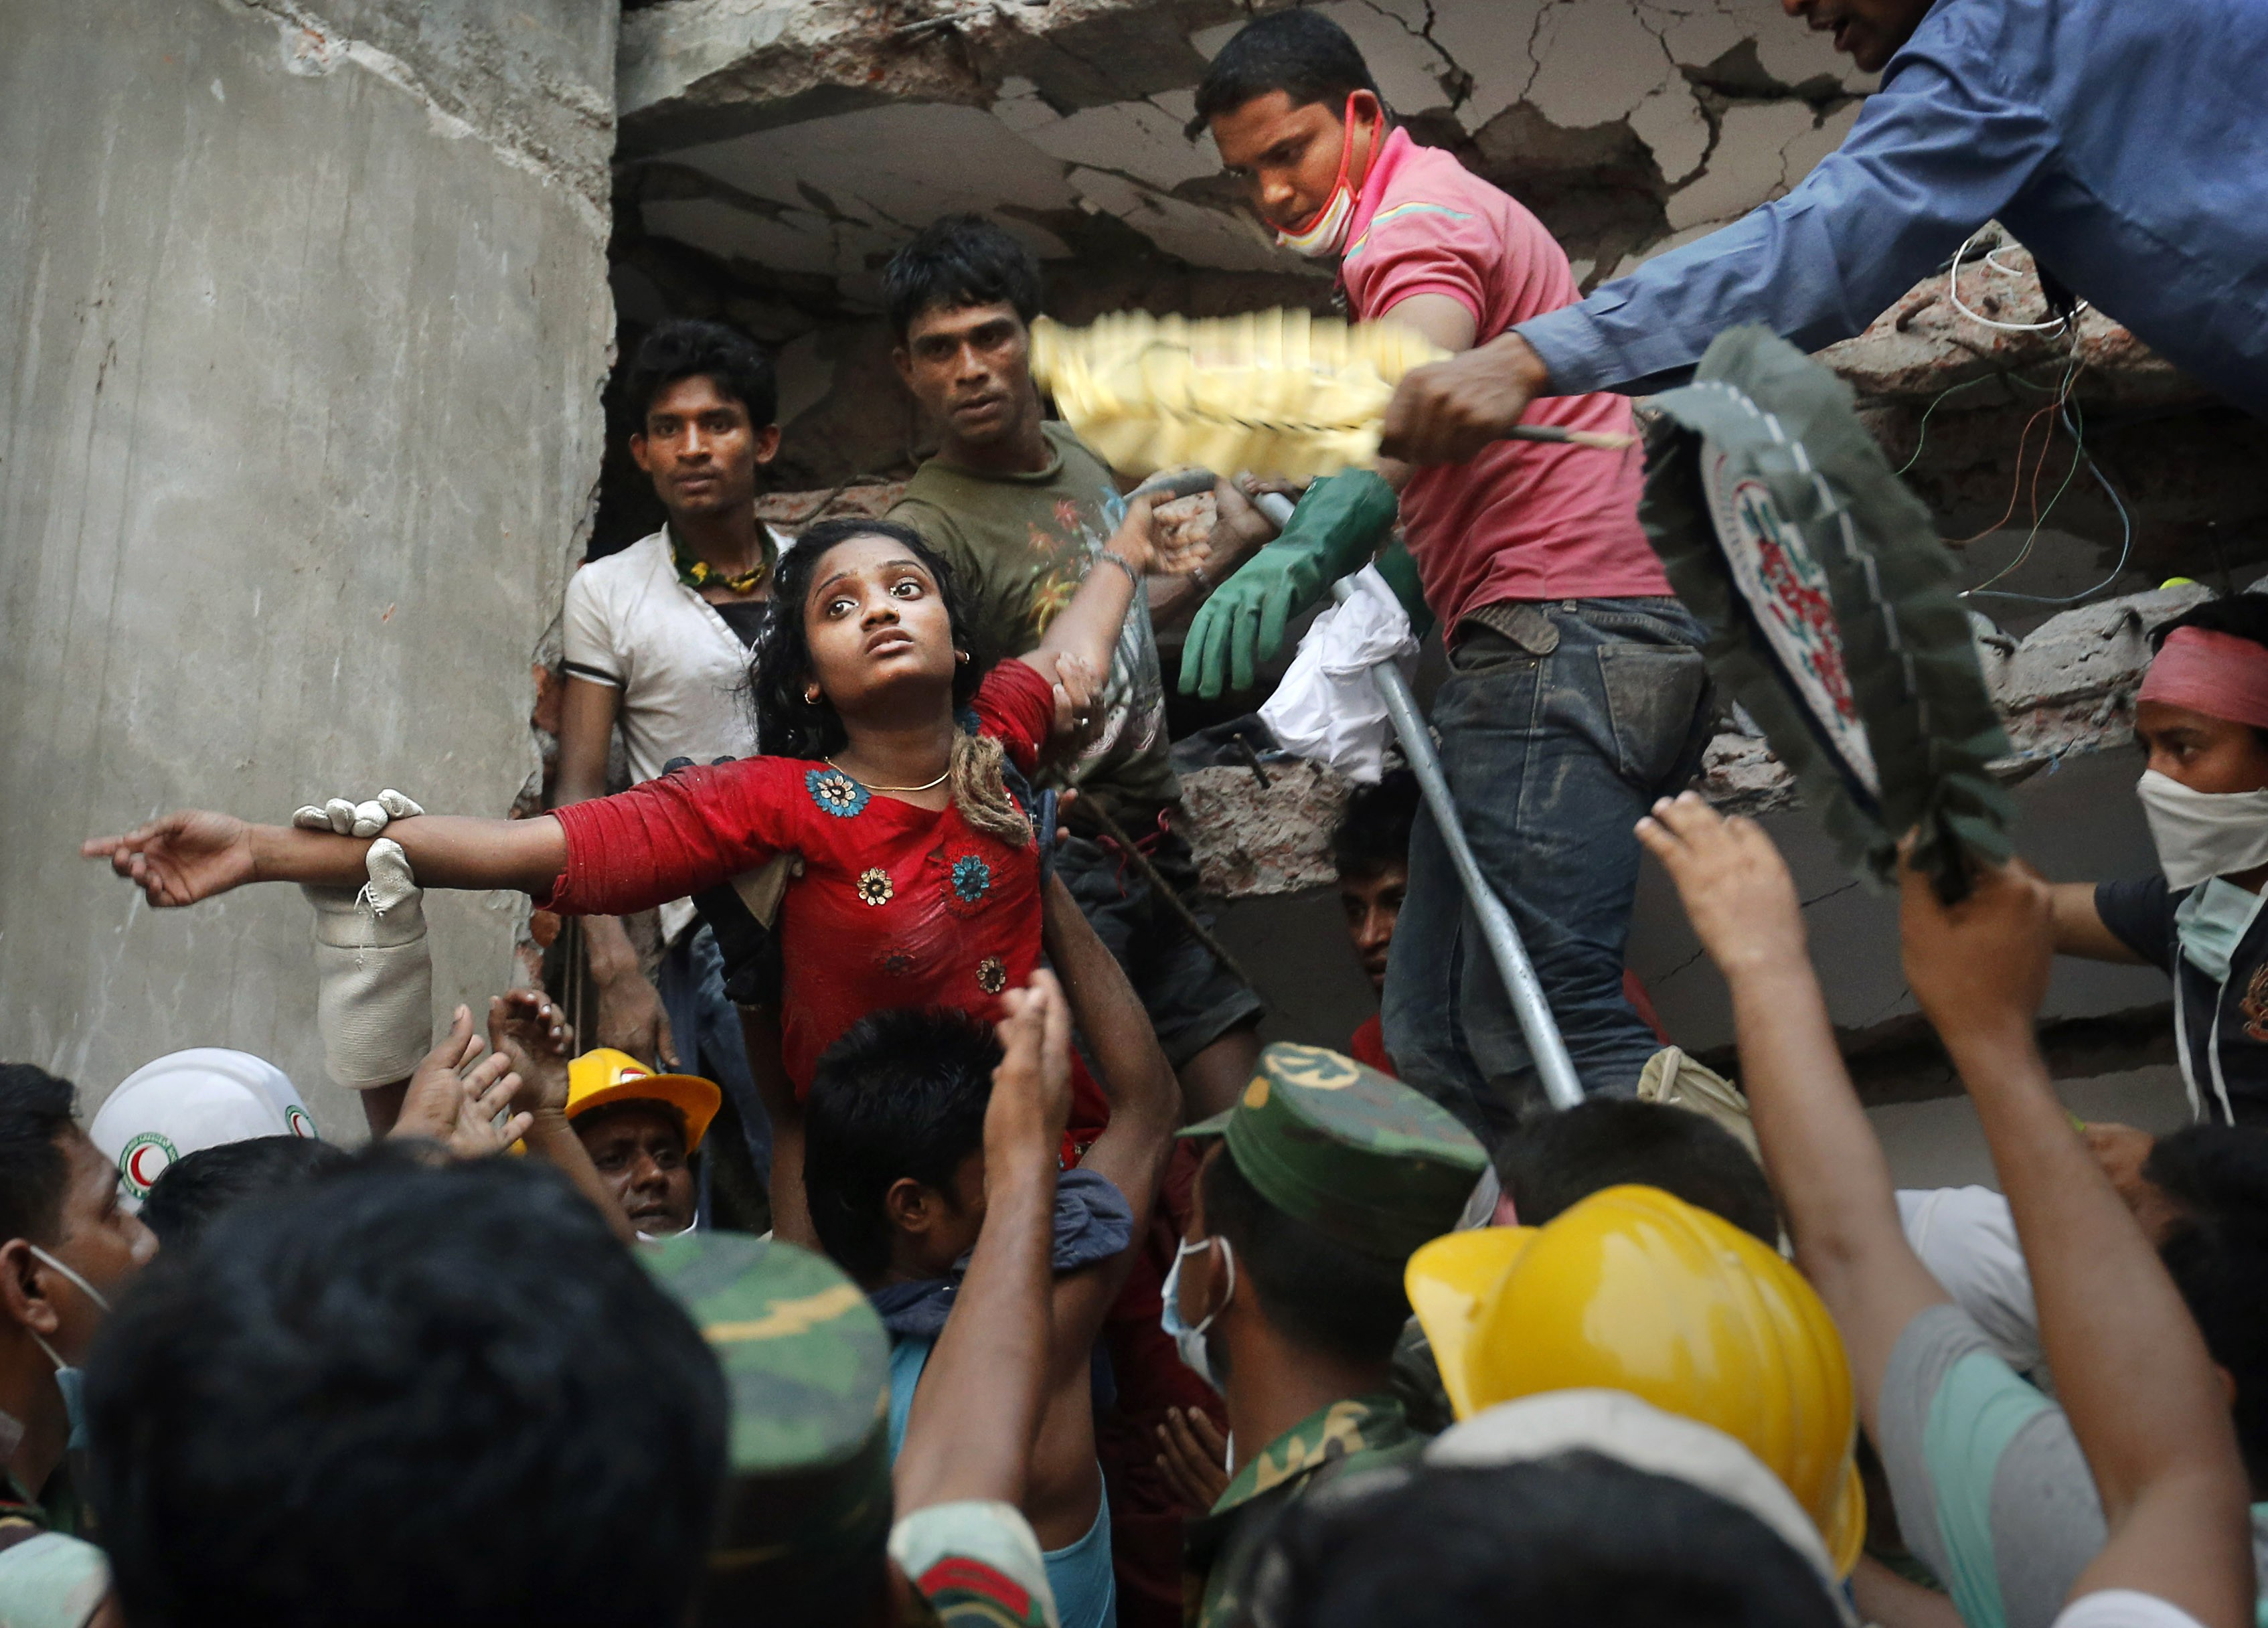 A survivor is lifted out of the rubble by rescuers after the collapse of the Rana Plaza building near Dhaka, Bangladesh,in April 2013. Photo: AP